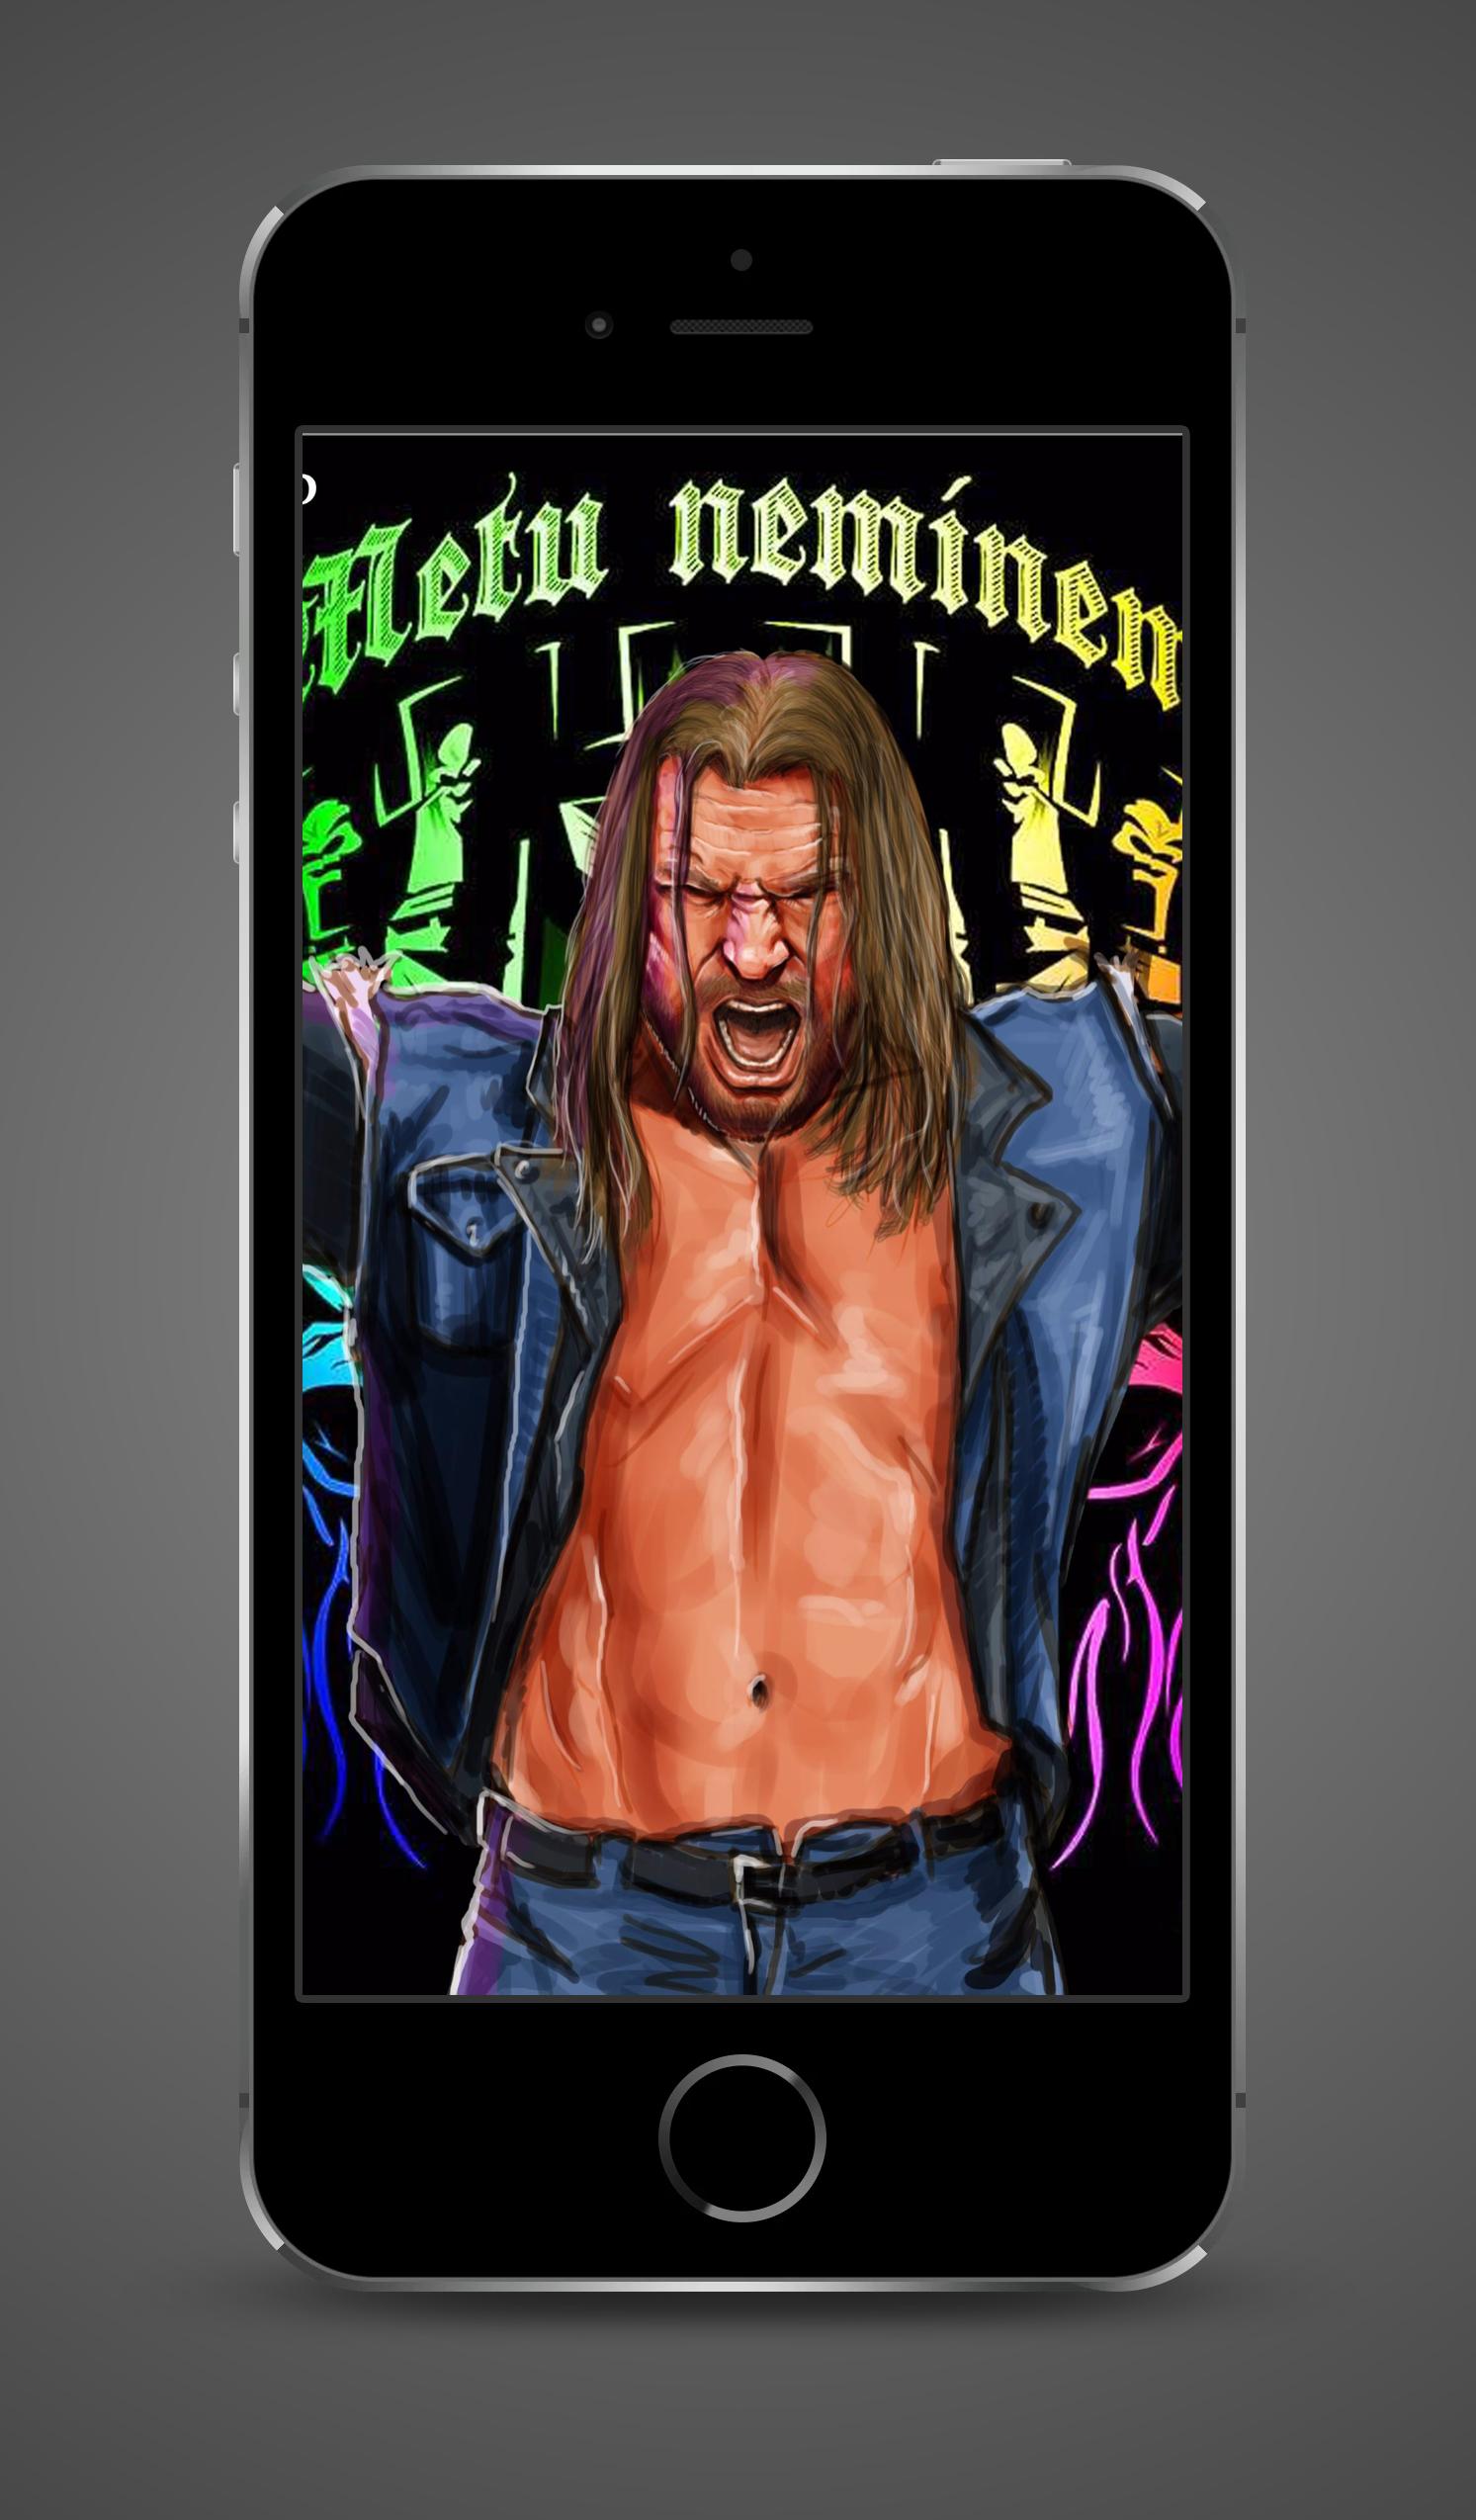 HD Triple H Wallpaper WWE for Android - APK Download